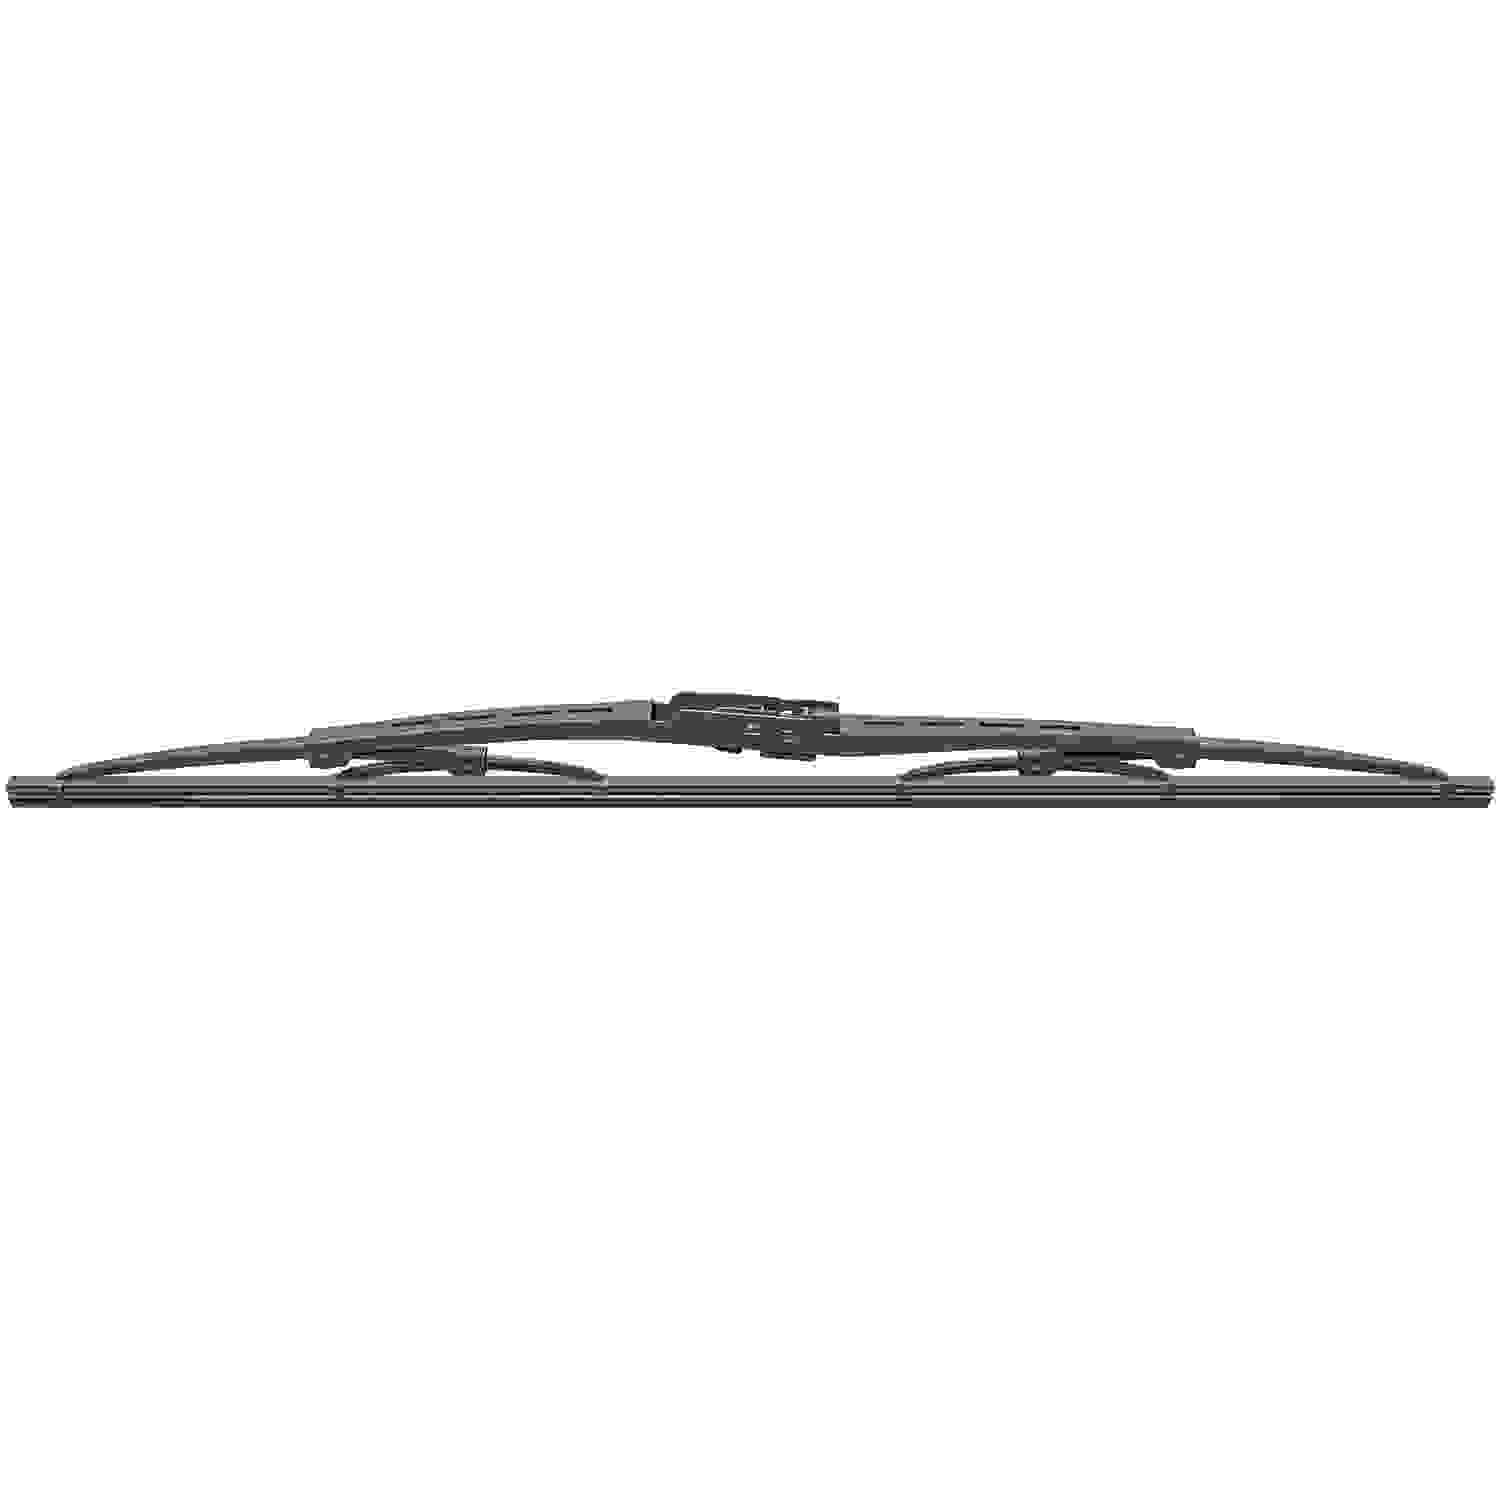 ANCO WIPER PRODUCTS - 31-series Wiper Blade (Front) - ANC 31-19